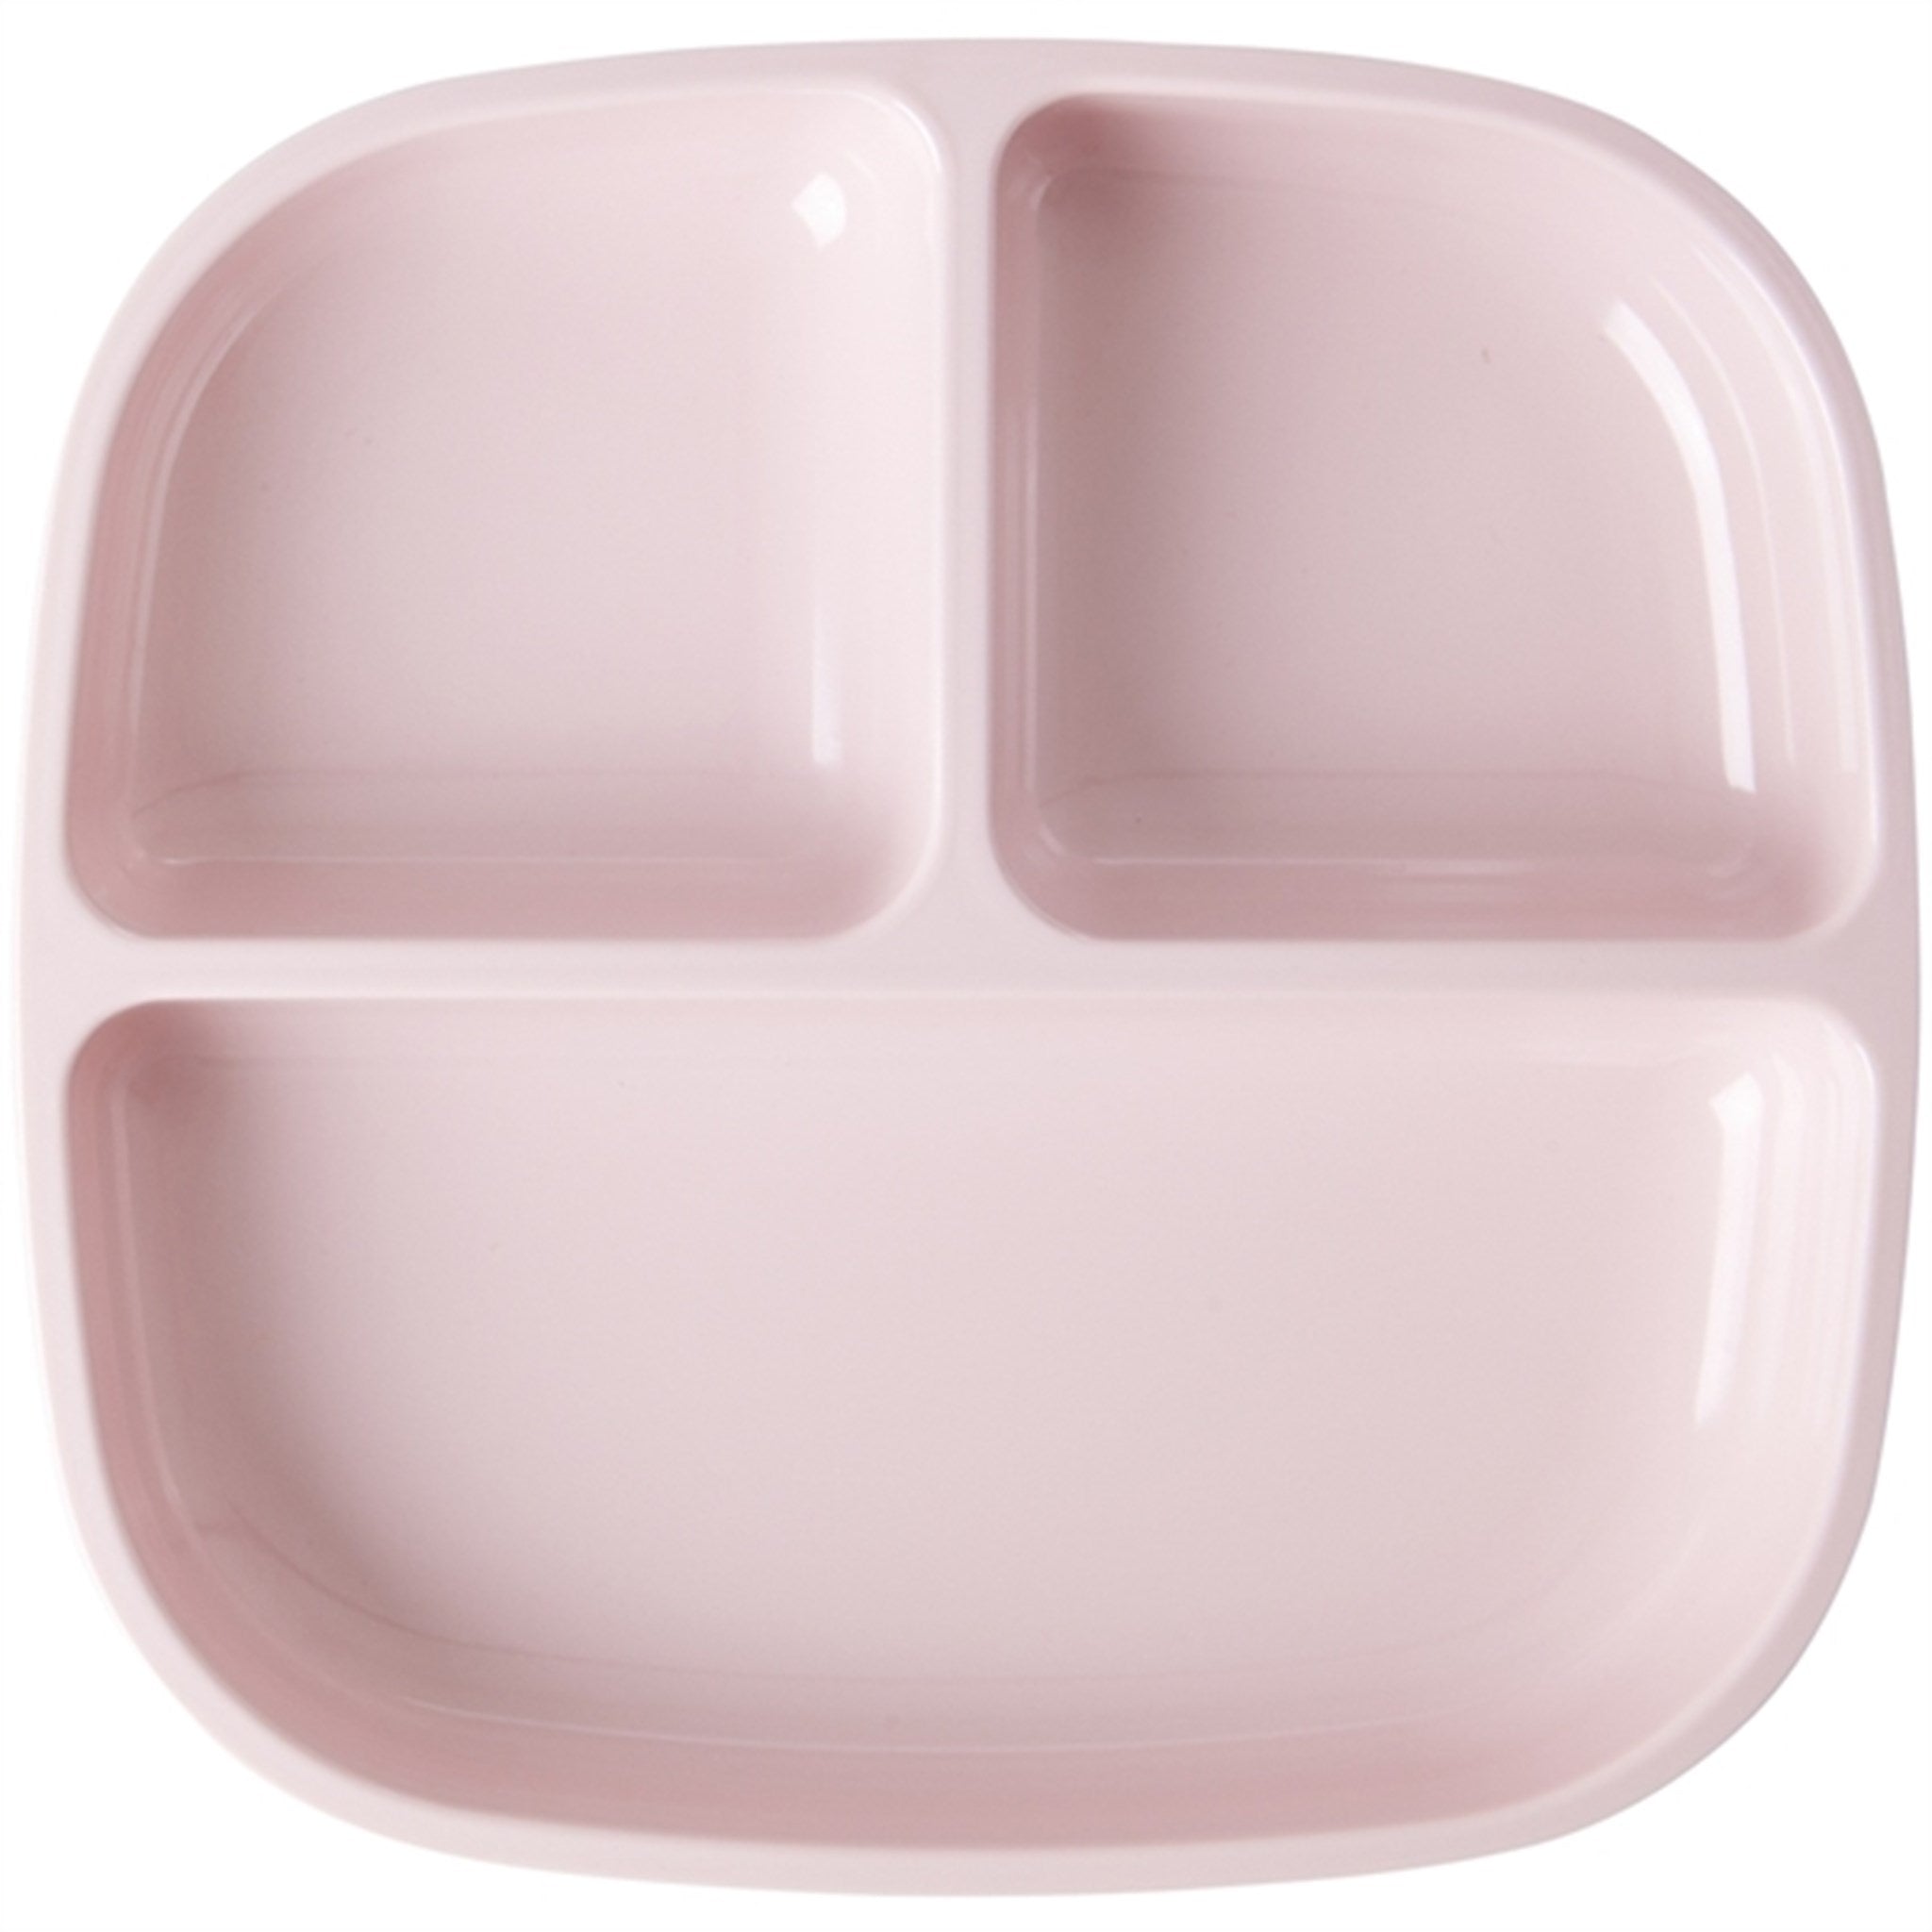 RICE Soft Pink Melamine Childrens Plate with 3 Rooms